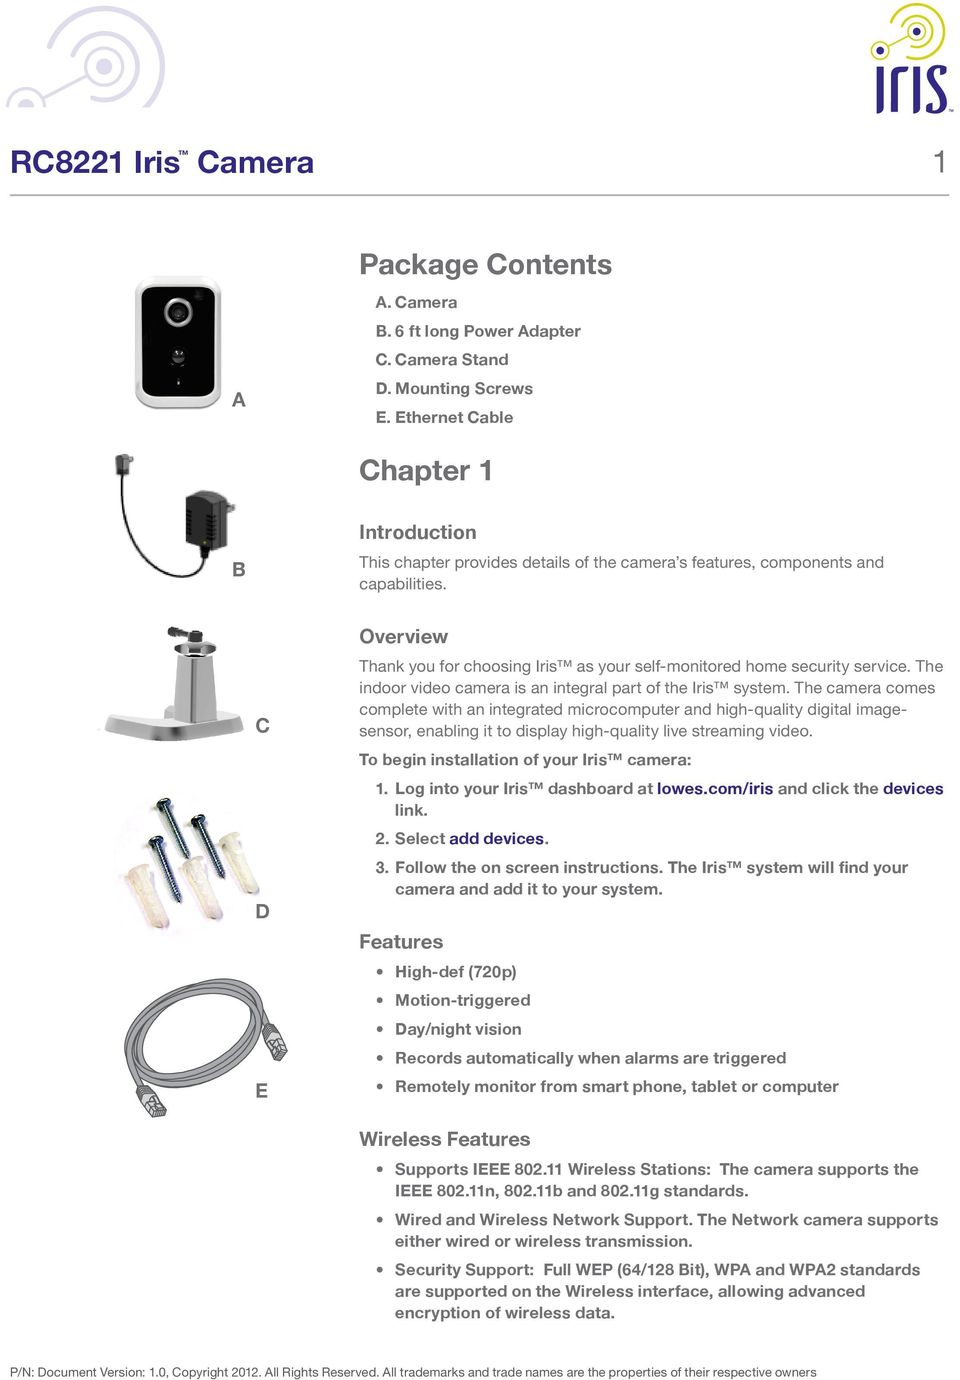 C D E Overview Thank you for choosing Iris as your self-monitored home security service. The indoor video camera is an integral part of the Iris system.